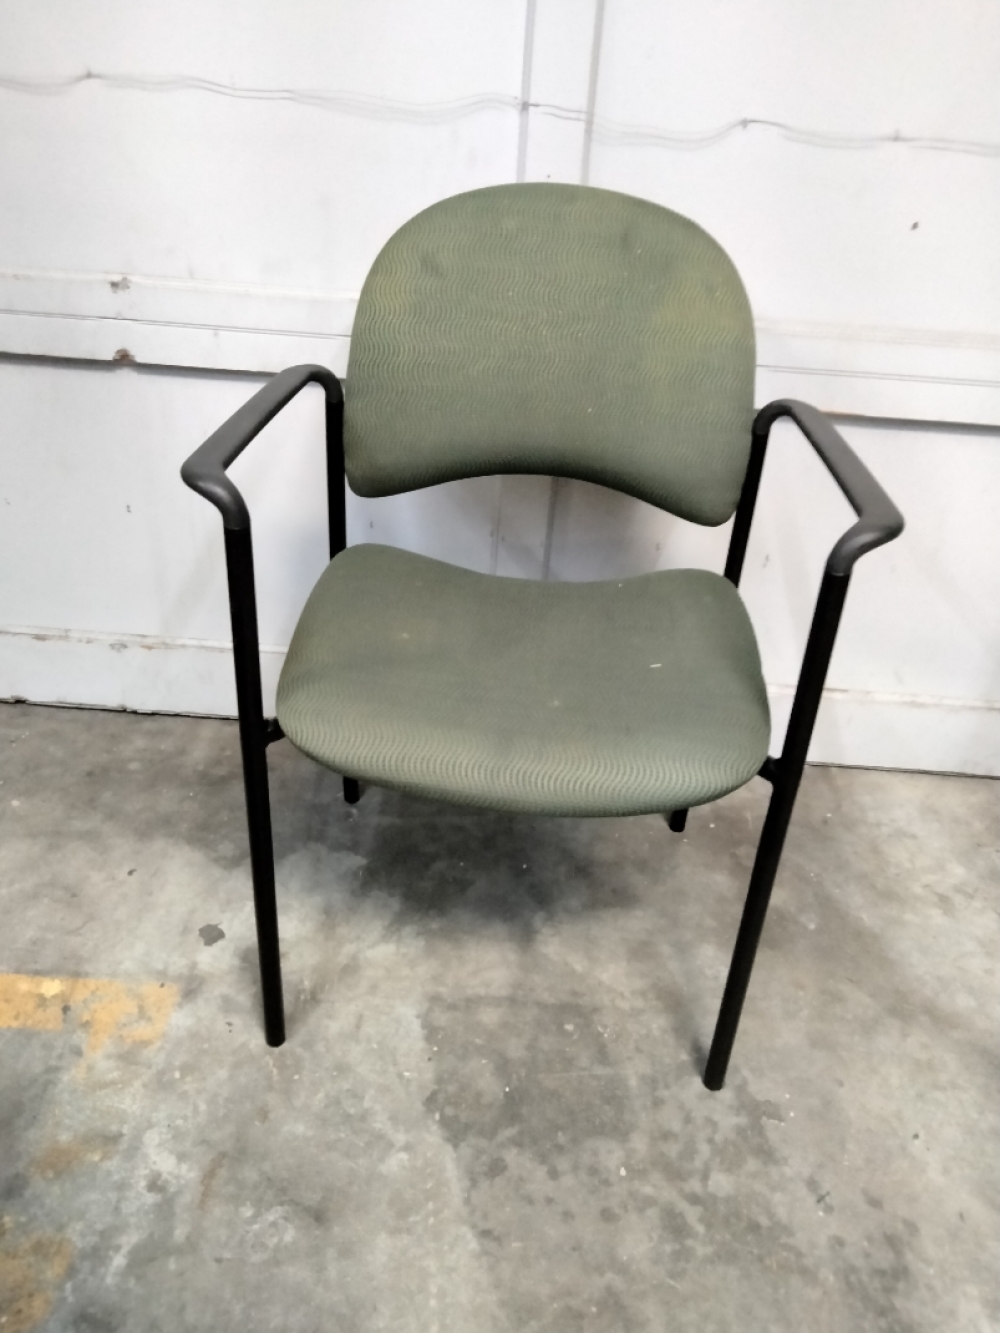  Stack chair